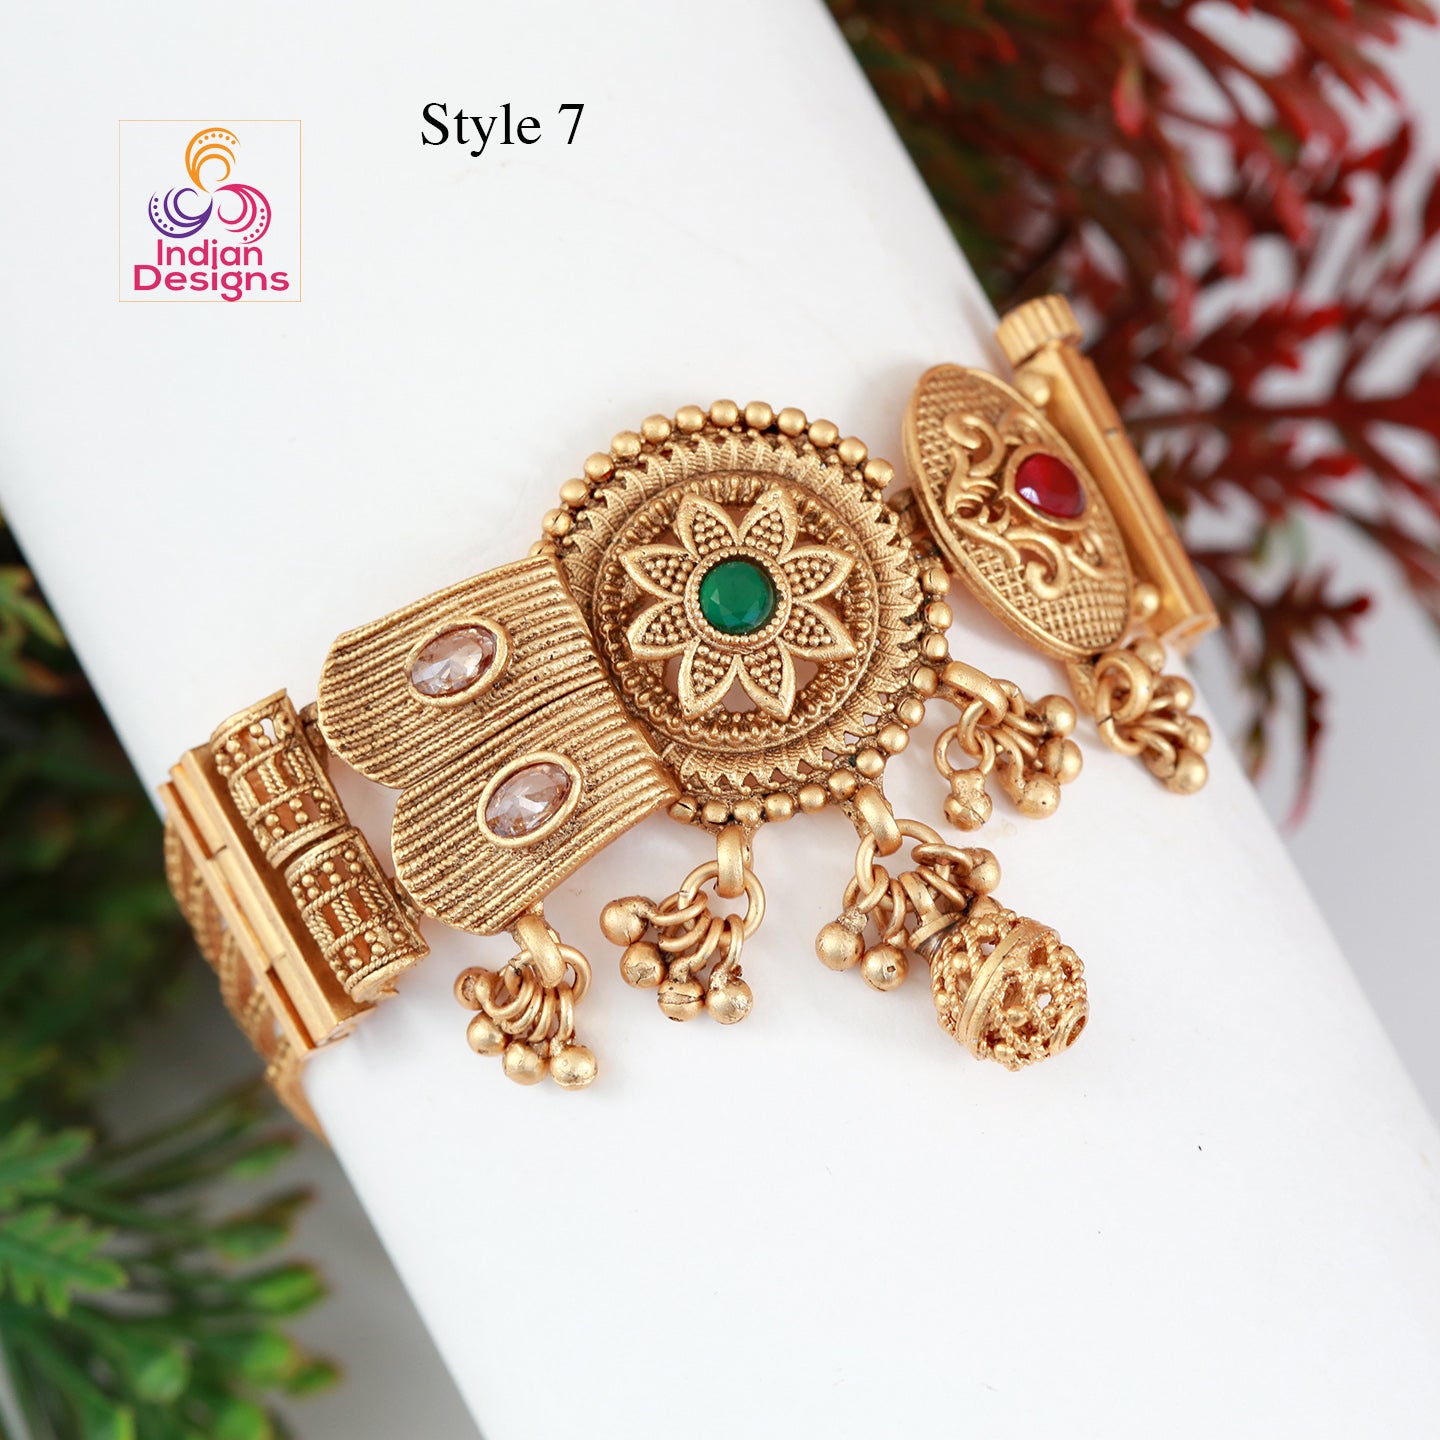 Antique gold plated South Indian chain bracelet | Gold Plated Bracelet temple jewelry | Bangle bracelet with matte finish | Indian Designs